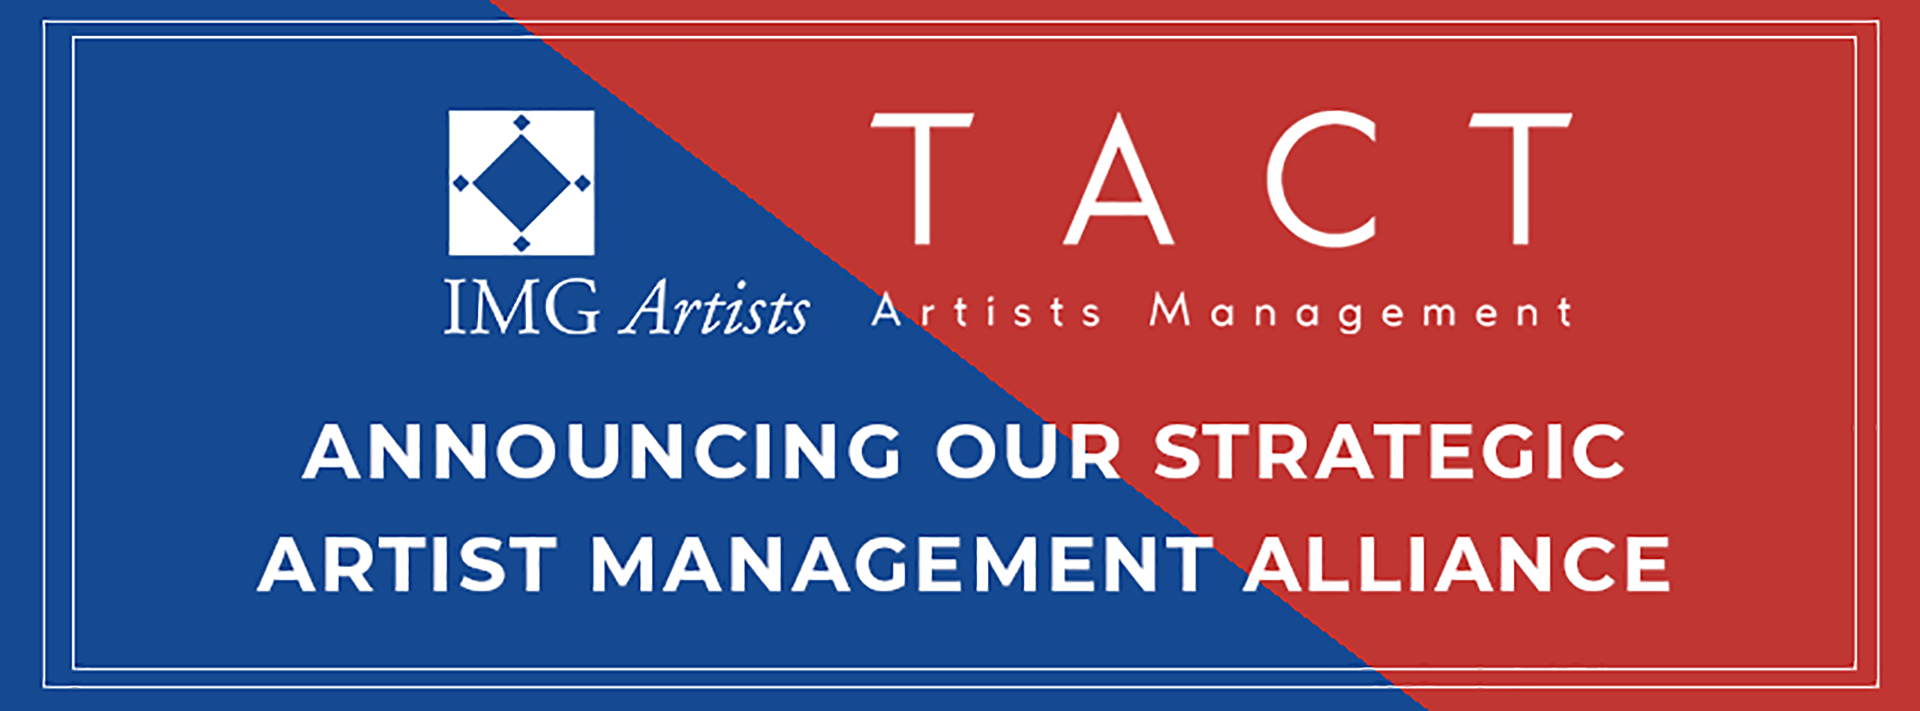 IMG and TACT, two leading artist management agencies, announce strategic alliance